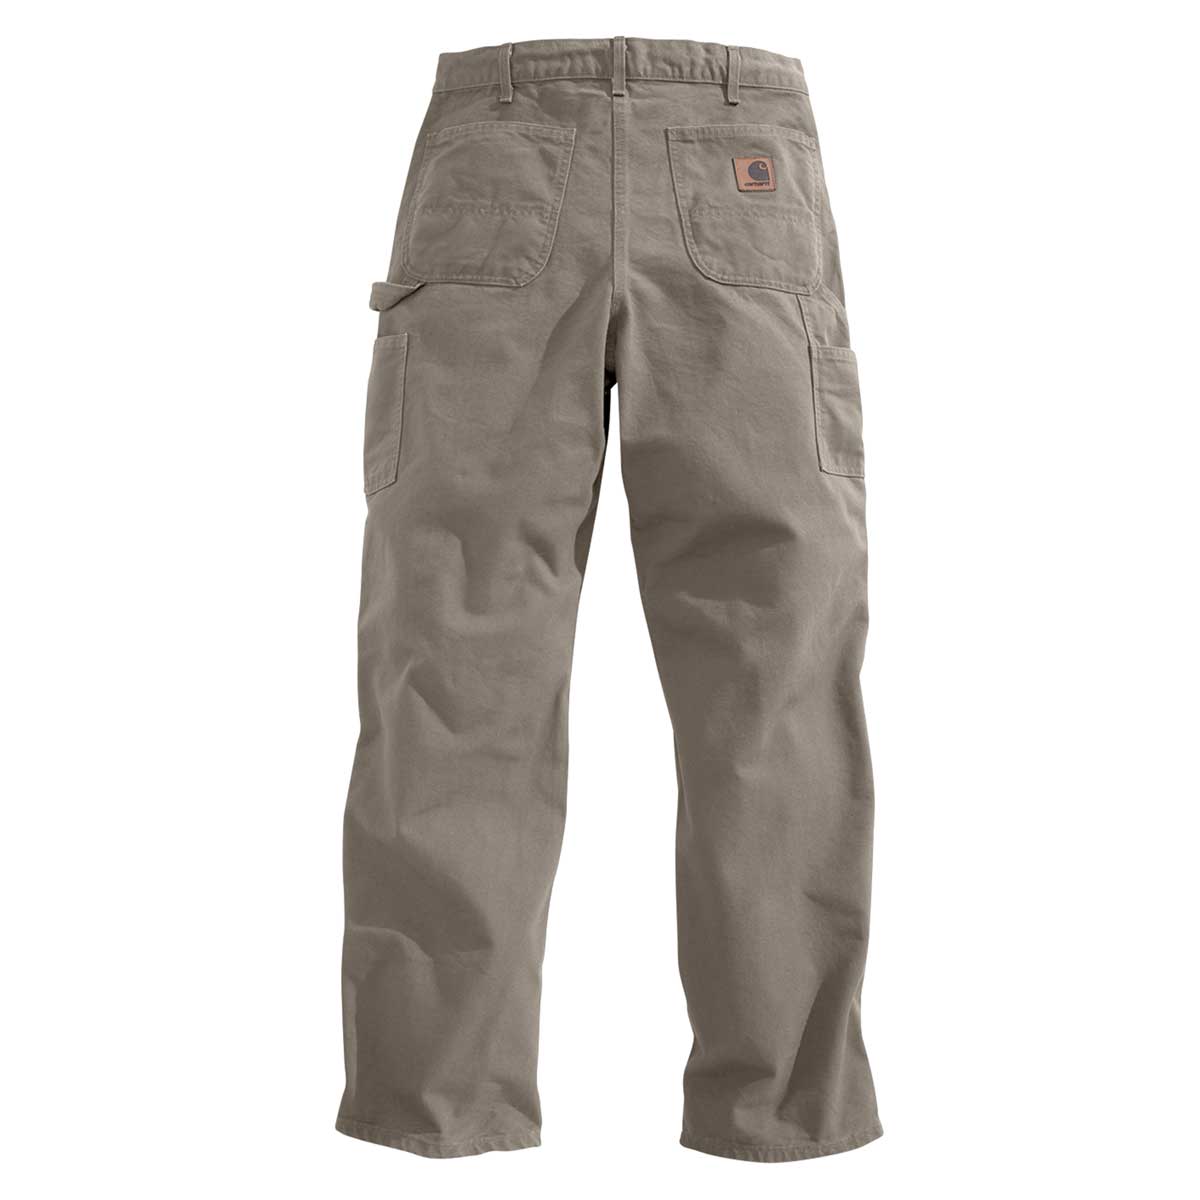 Carhartt B11 Washed Duck Work Pant 28